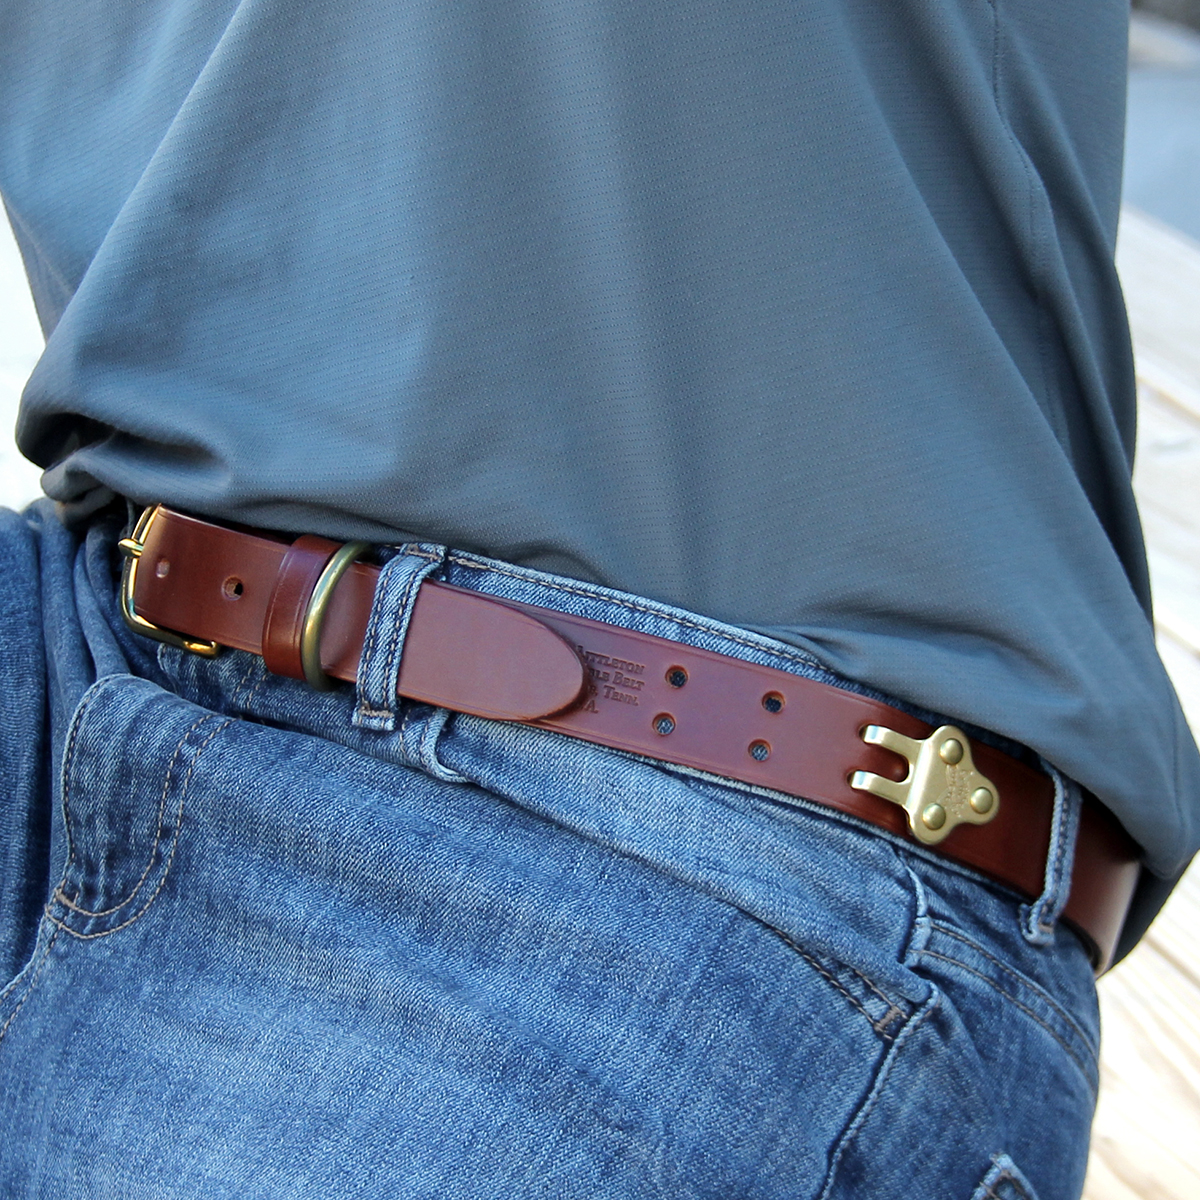 Surcingle Belt With Military Brass Buckle – Black